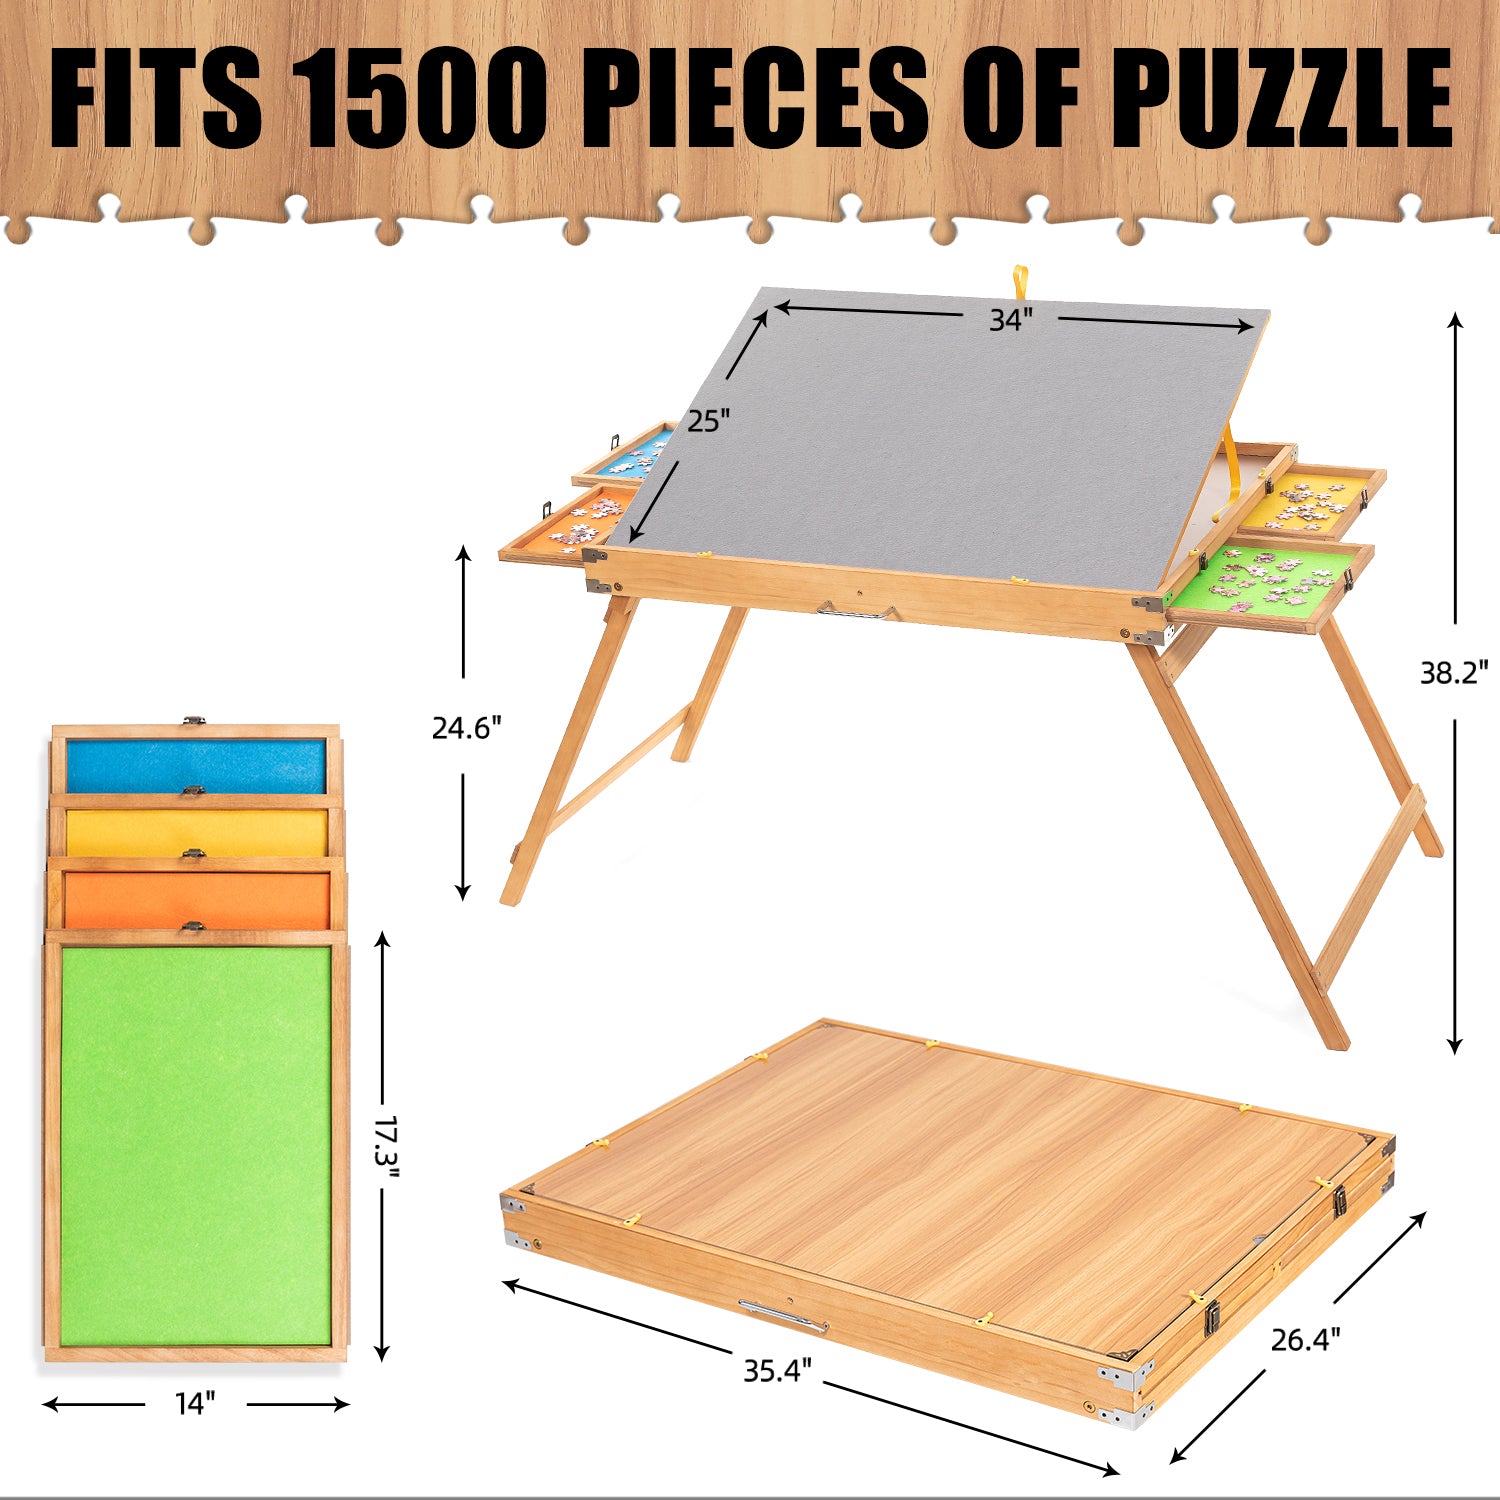  1500 Pieces Jigsaw Puzzle Table with Drawers and Legs